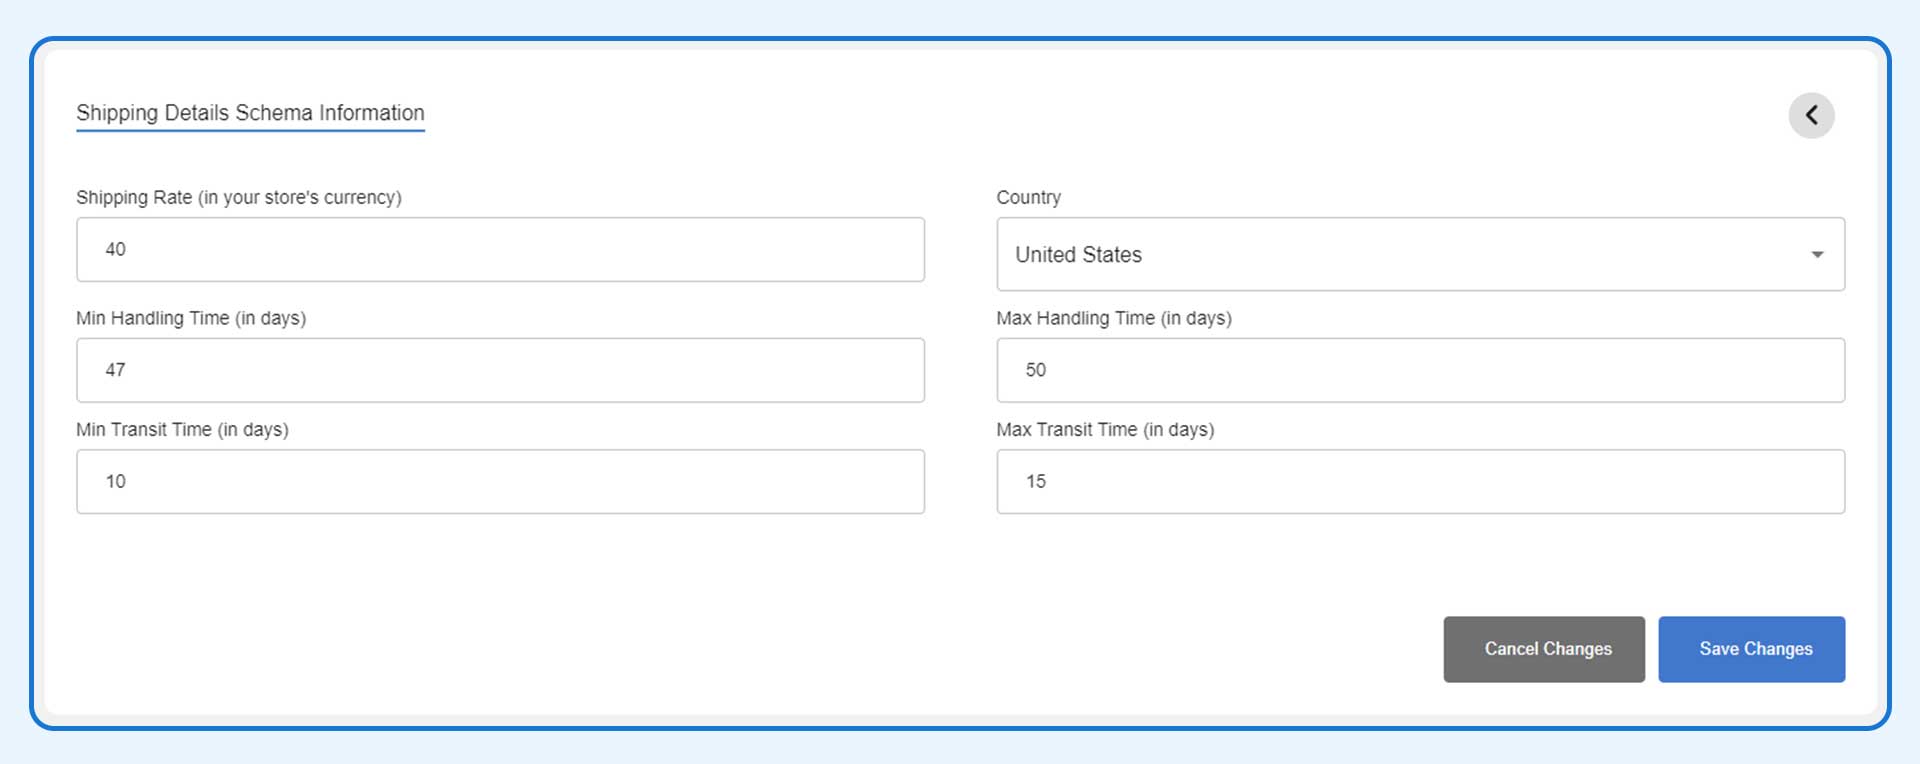 Activating Shipping Details Schema Information feature